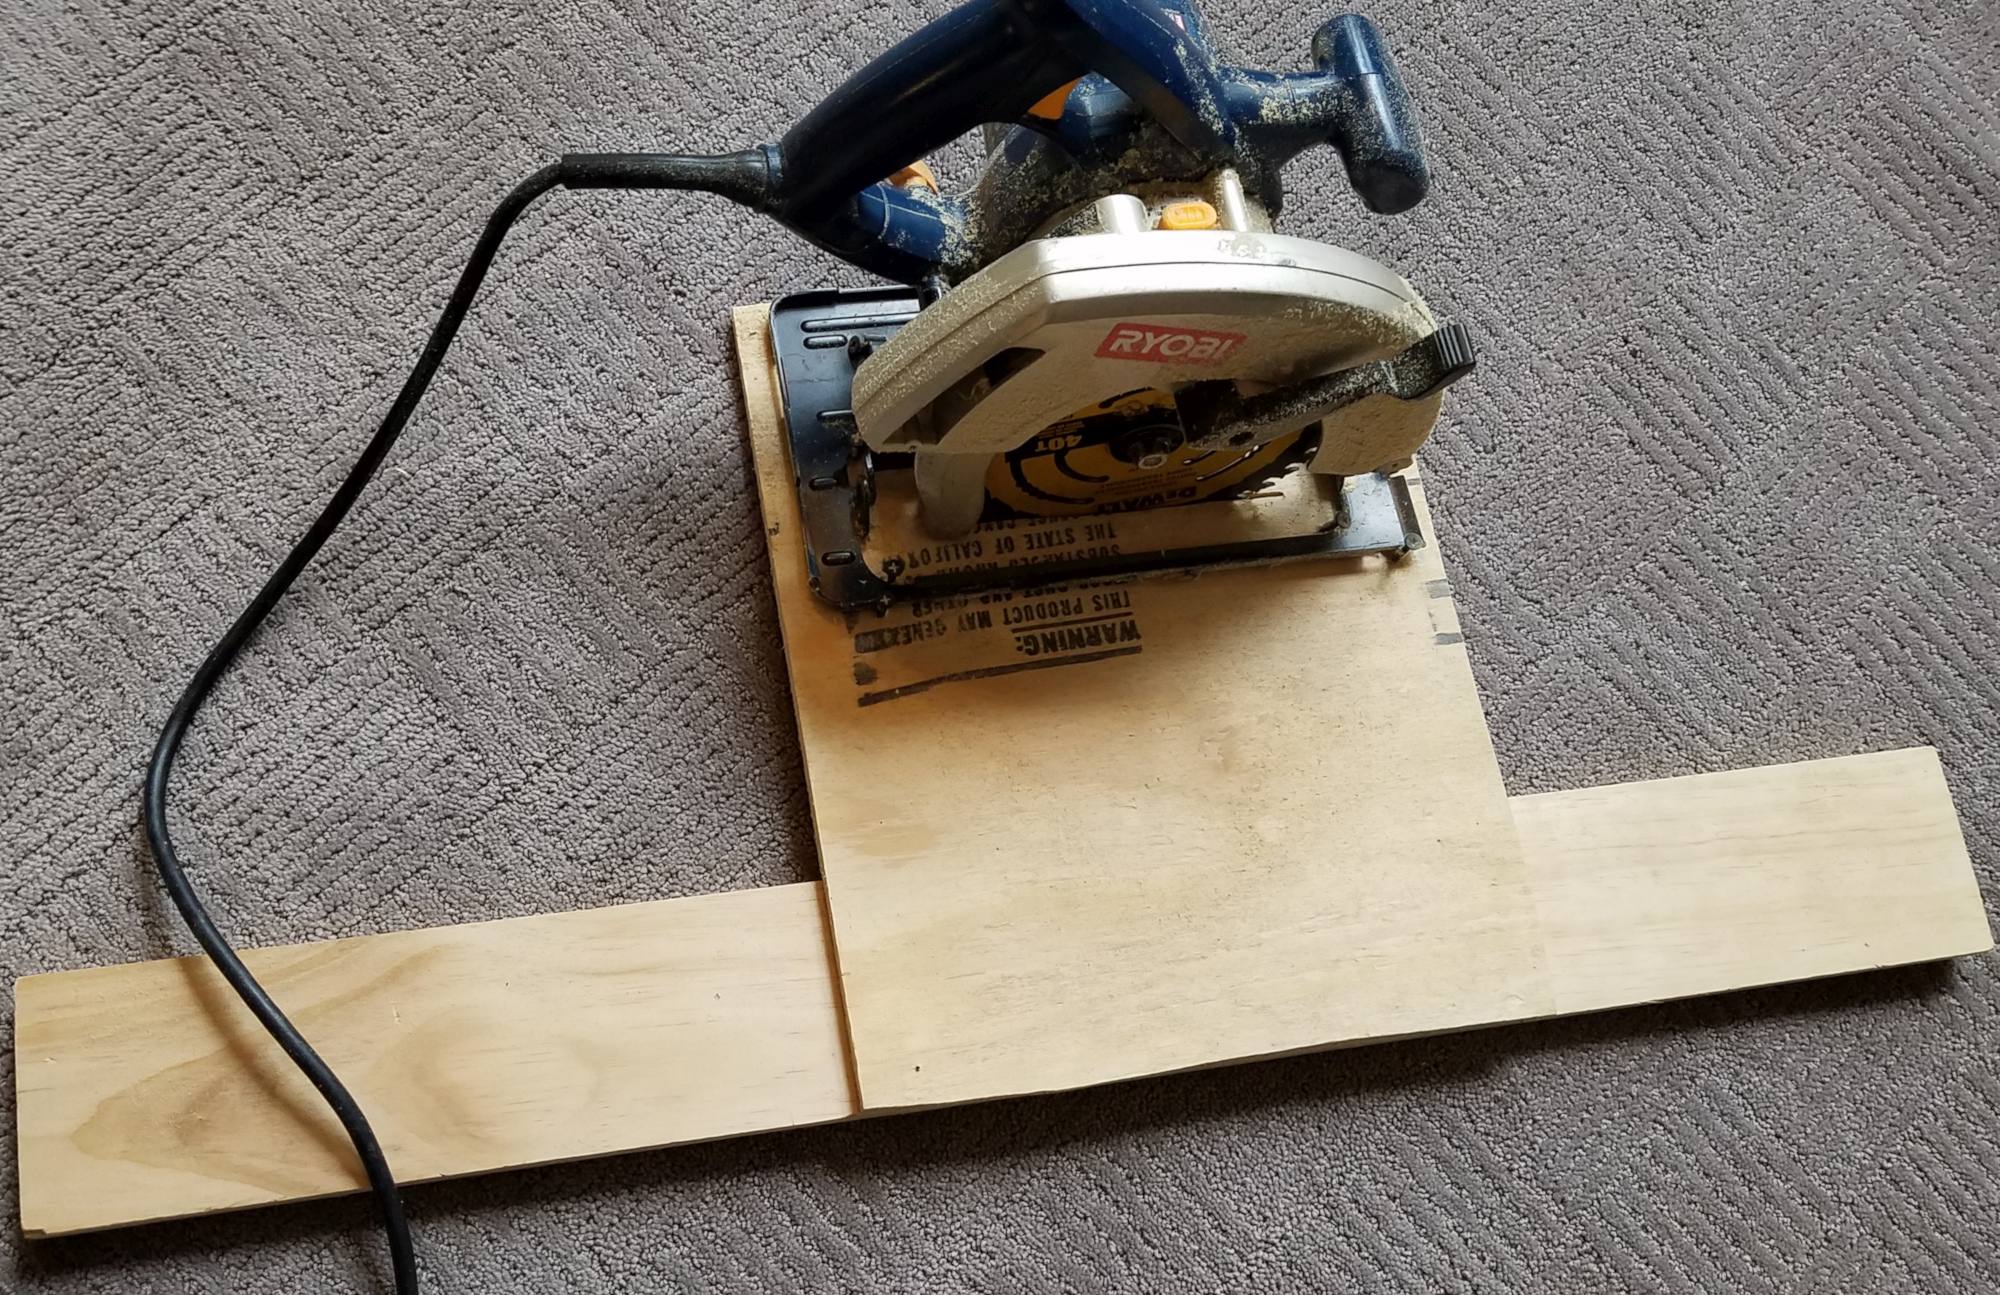 DIY Rustic Wide Plank Plywood Flooring - Secure The Jig To The Circular Saw Using Screws